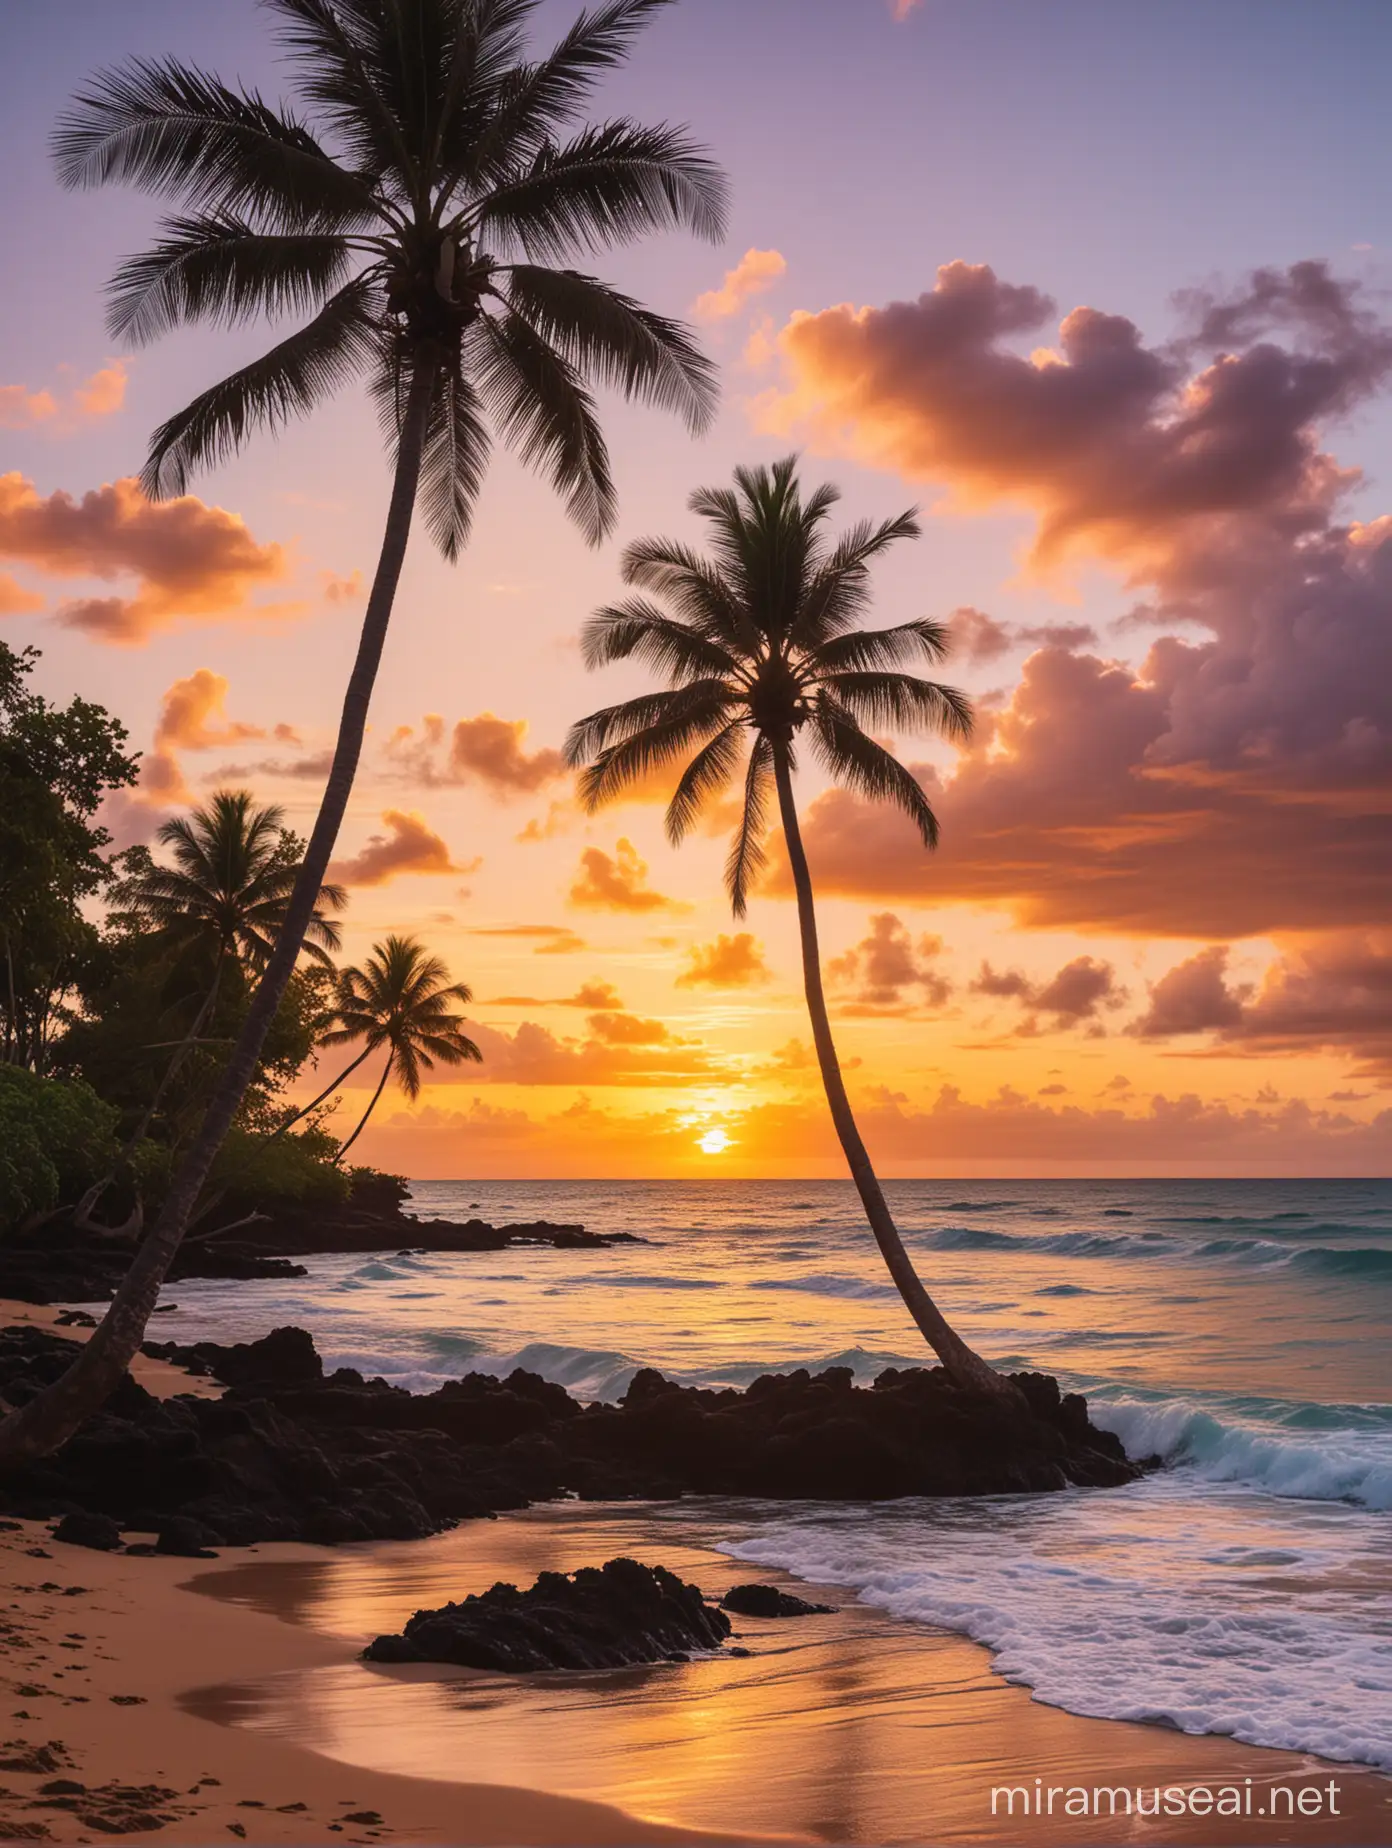 a wonderful photograph from a sunet in Hawaii, serne feelings, nostalgic vibes, wonderful colors